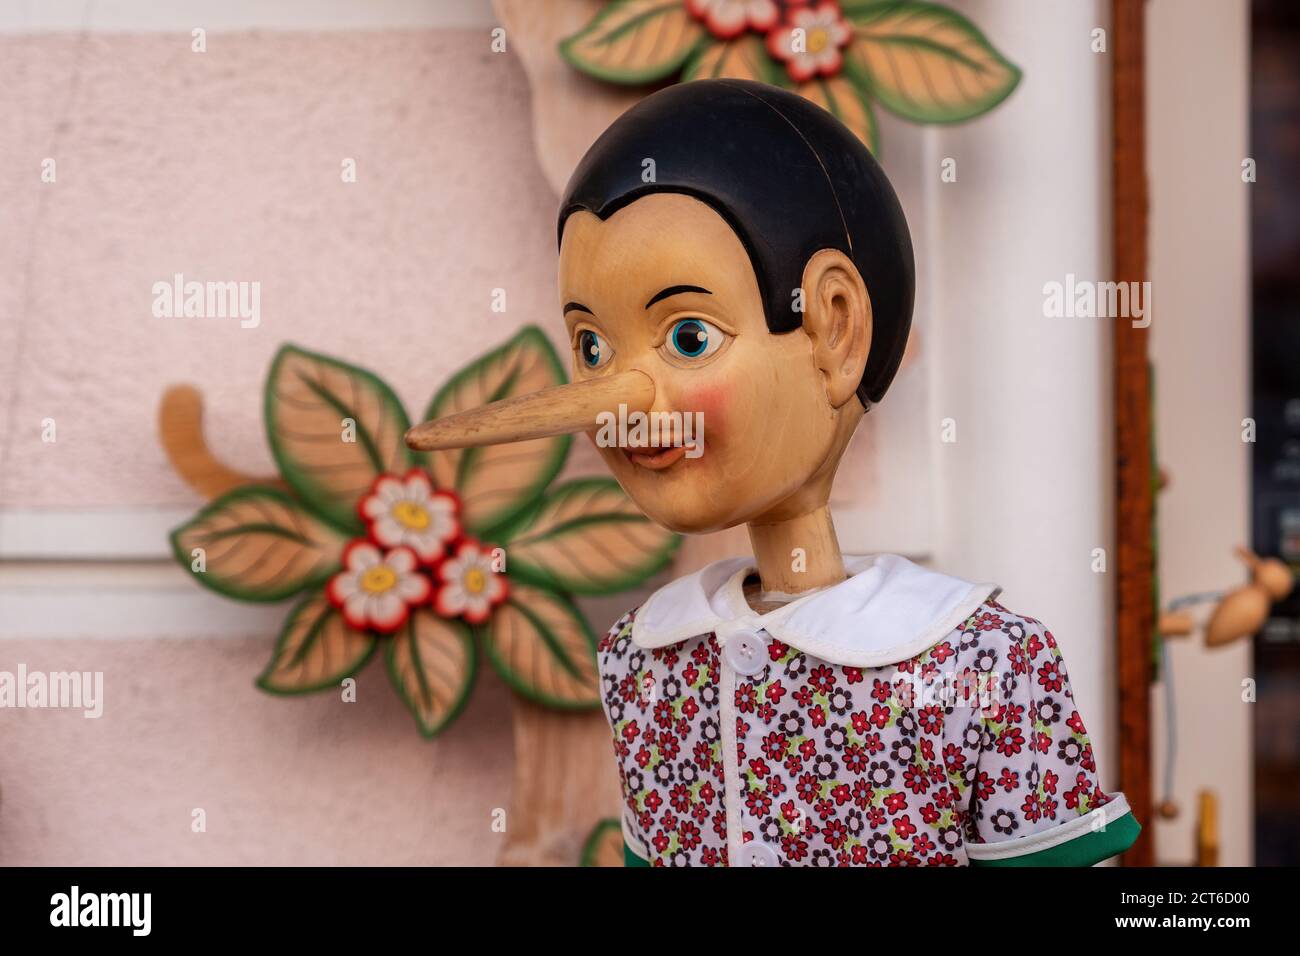 Cesenatico, Italy, July 2020: Wooden statue of Pinocchio with donkey ears and long nose. Pinocchio is the protagonist of a famous Italian fairy tale. Stock Photo